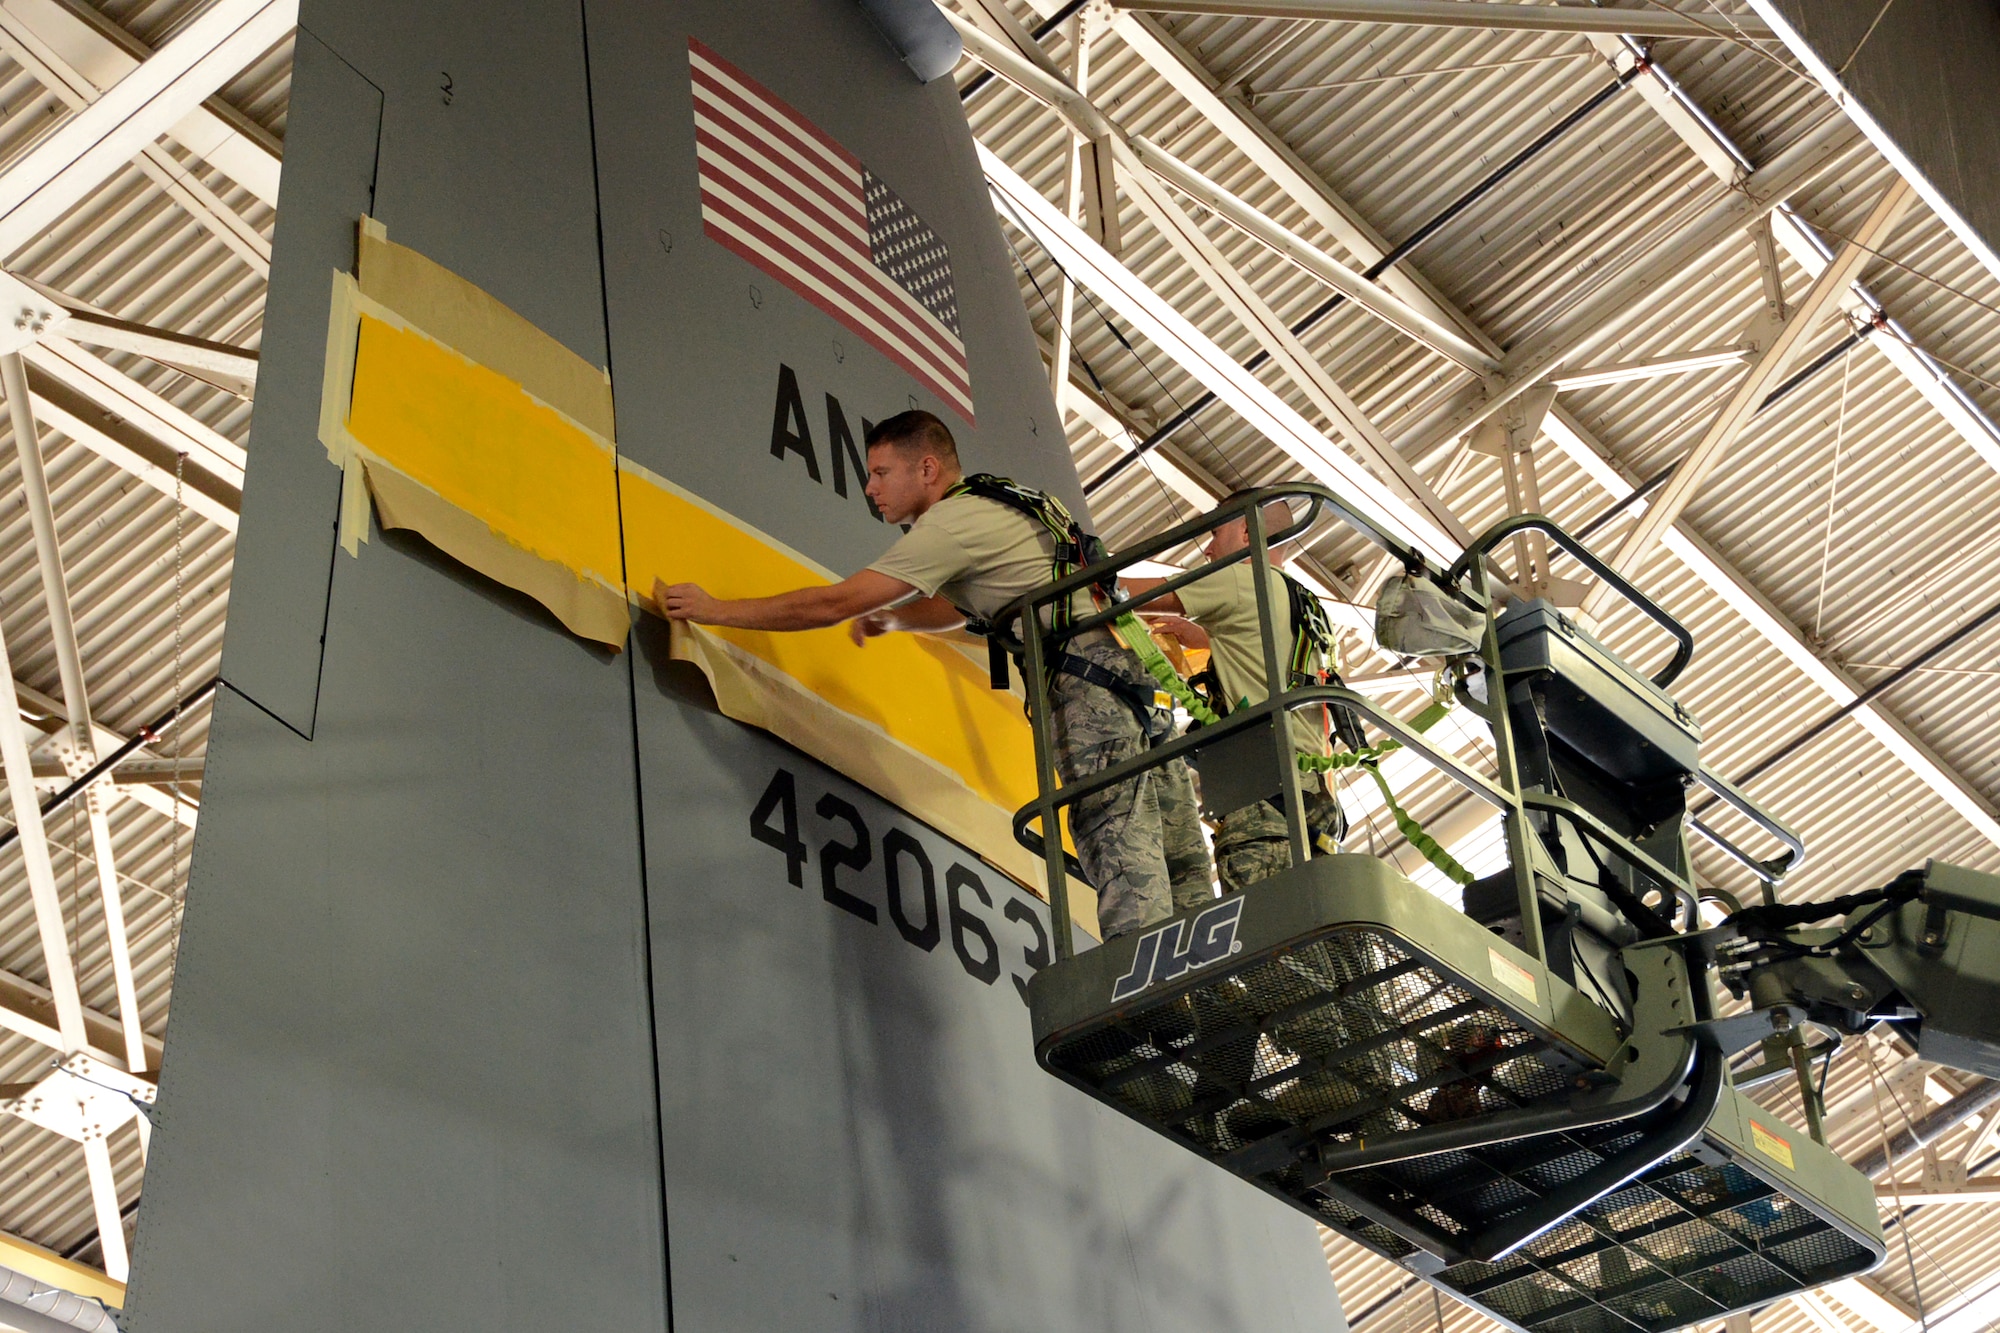 One year after the arrival of the first C-130H Hercules aircraft at Bradley Air National Guard Base, East Granby, Conn., the eighth and final aircraft receives tail paint in the hangar, Friday, October 17, 2014.  The Flying Yankees' acceptance of the final aircraft assigned to the 103rd Airlift Wing Wednesday, October 15, 20104, marks an important milestone in the unit's conversion to the C-130H mission.  (U.S. Air National Guard photo by Master Sgt. Erin McNamara)